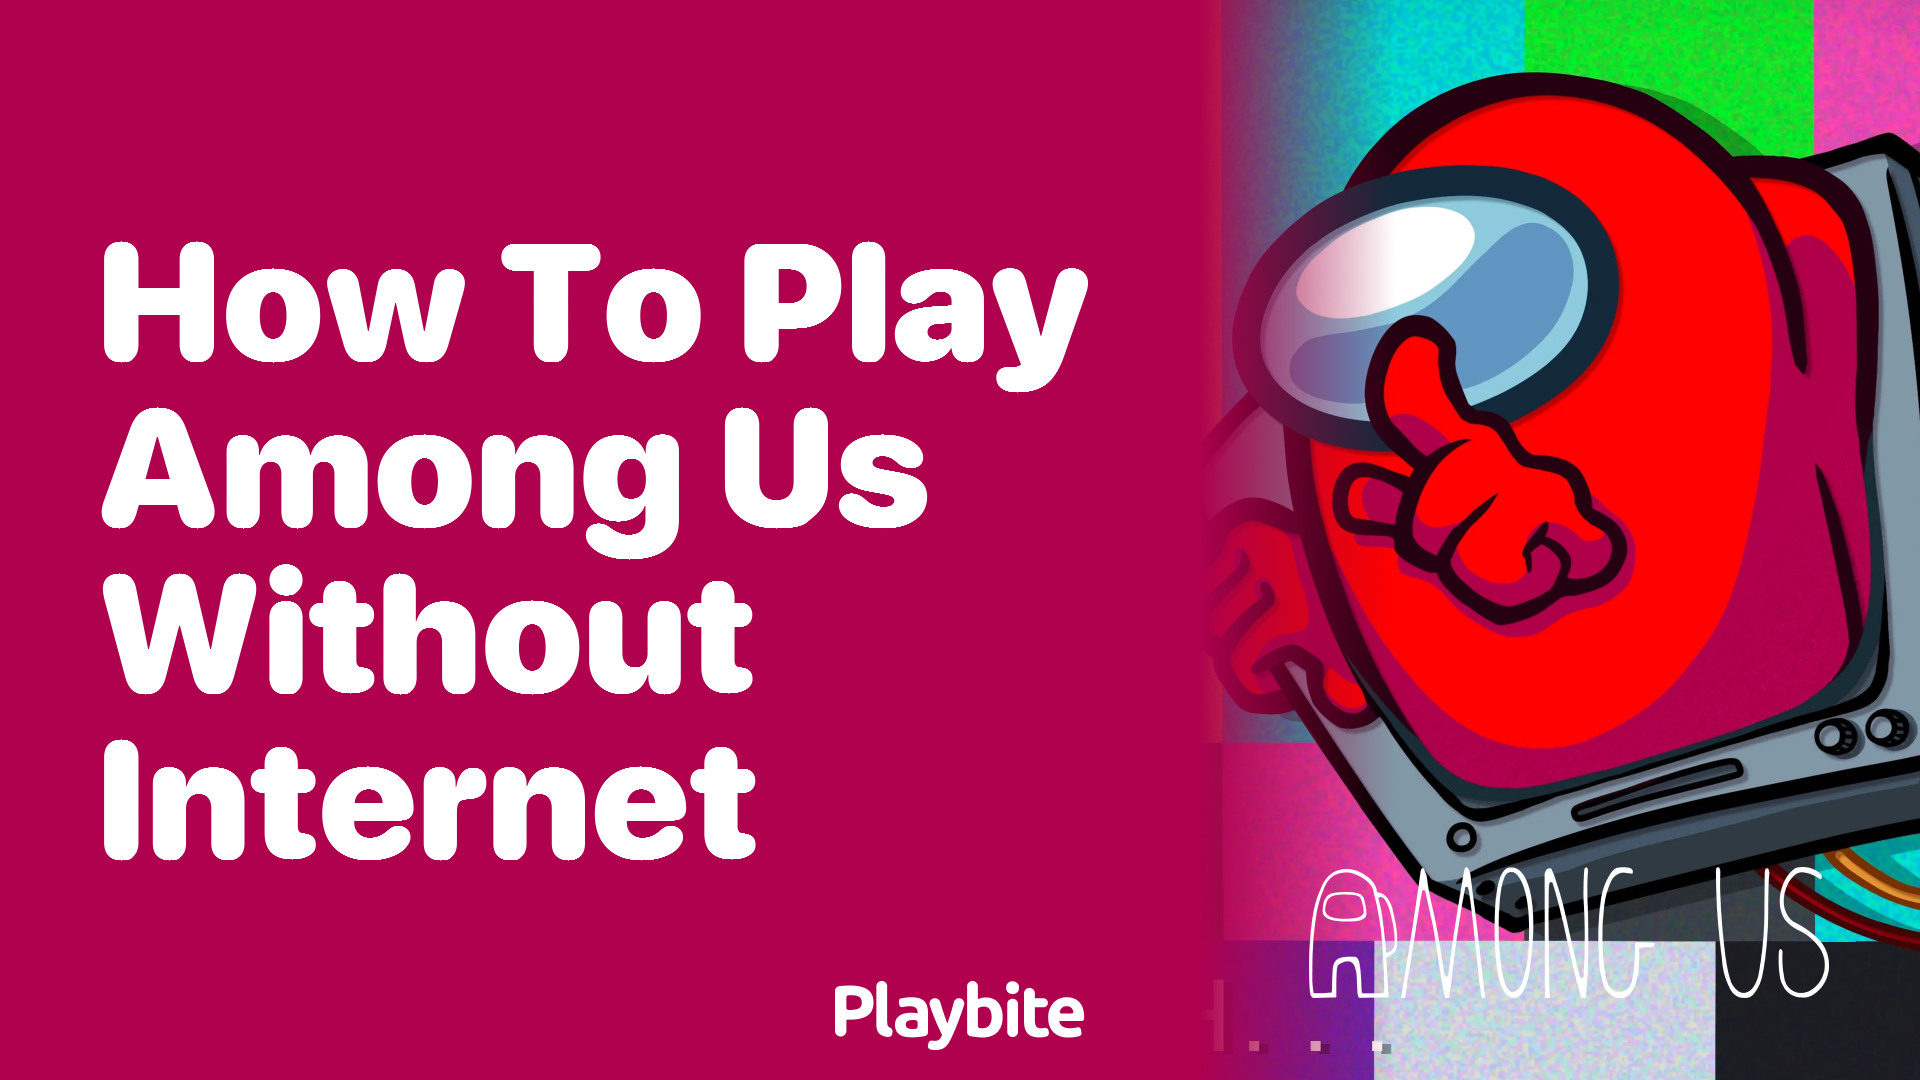 How to Play Among Us Without Internet